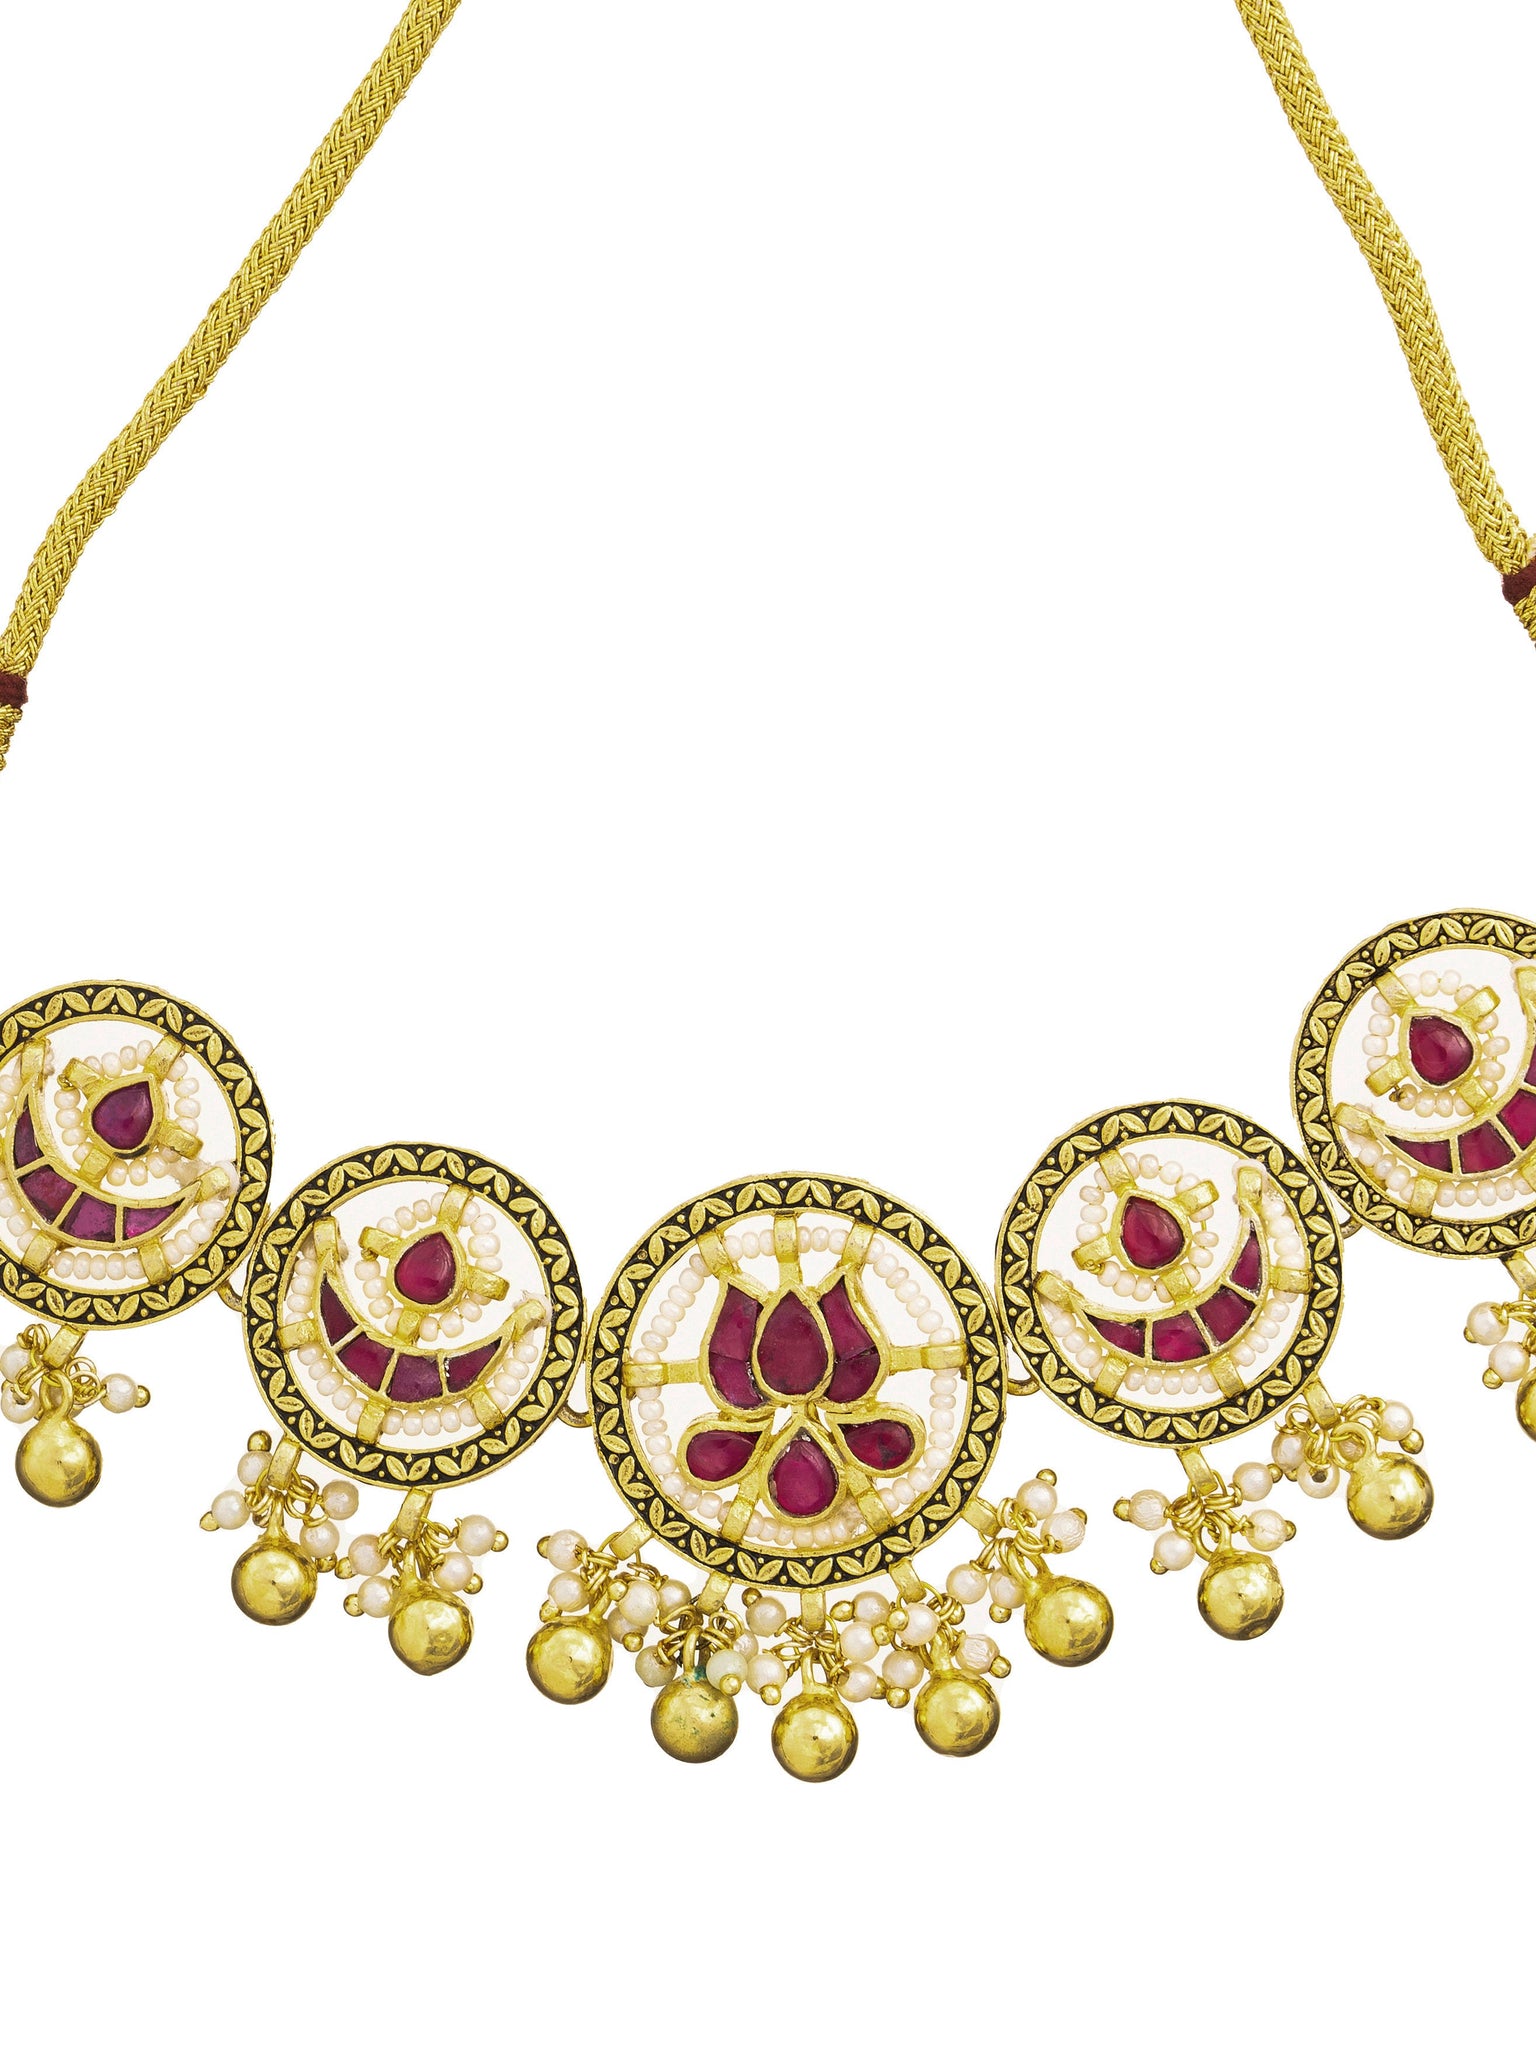 22 KT Gold-Plated Handcrafted Lotus Choker Set With Bead Drops 